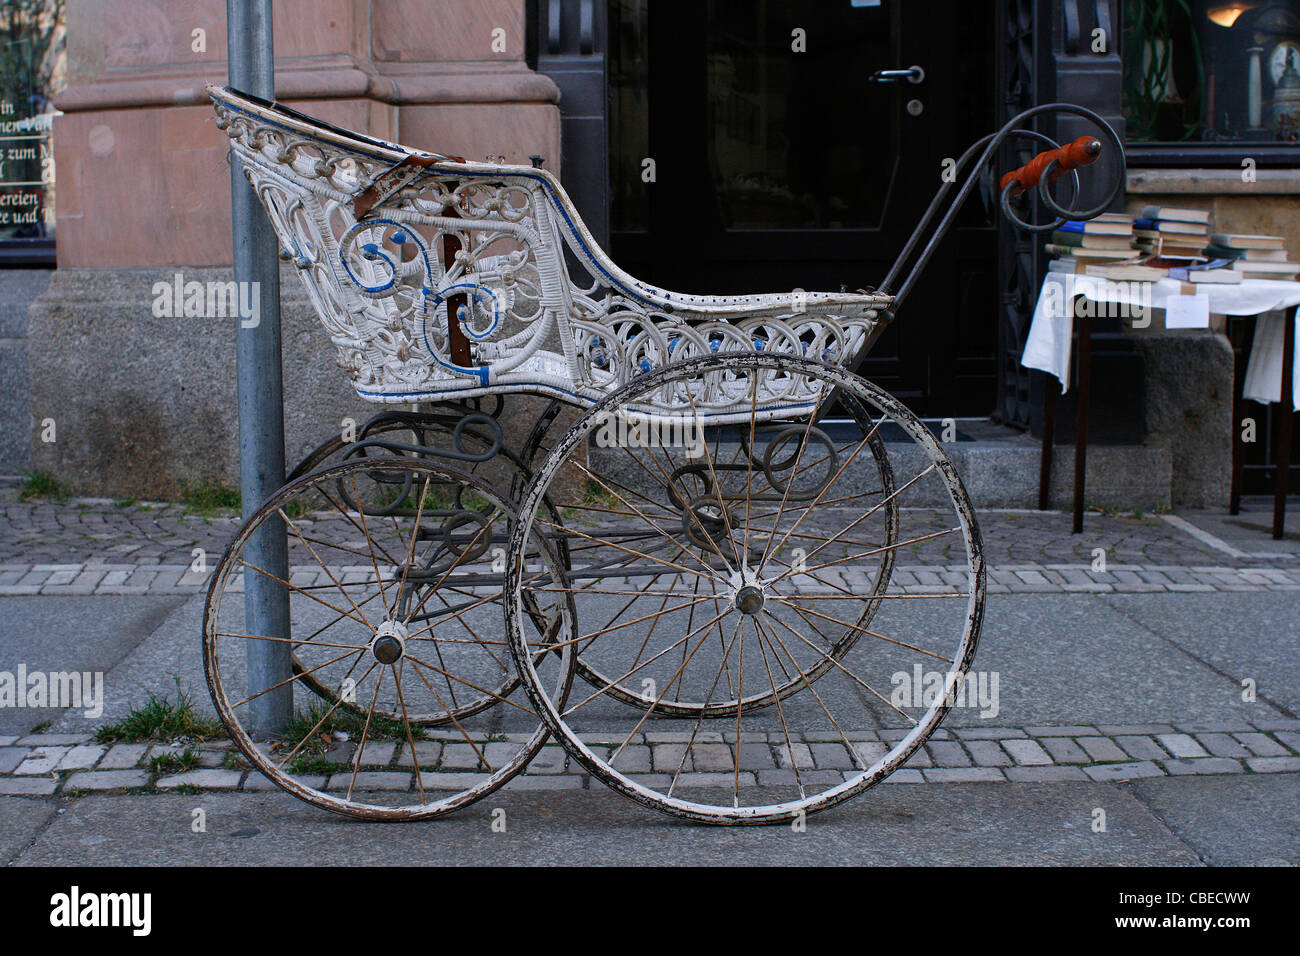 An old pram on the road in the city center of Leipzig, Germany. Stock Photo